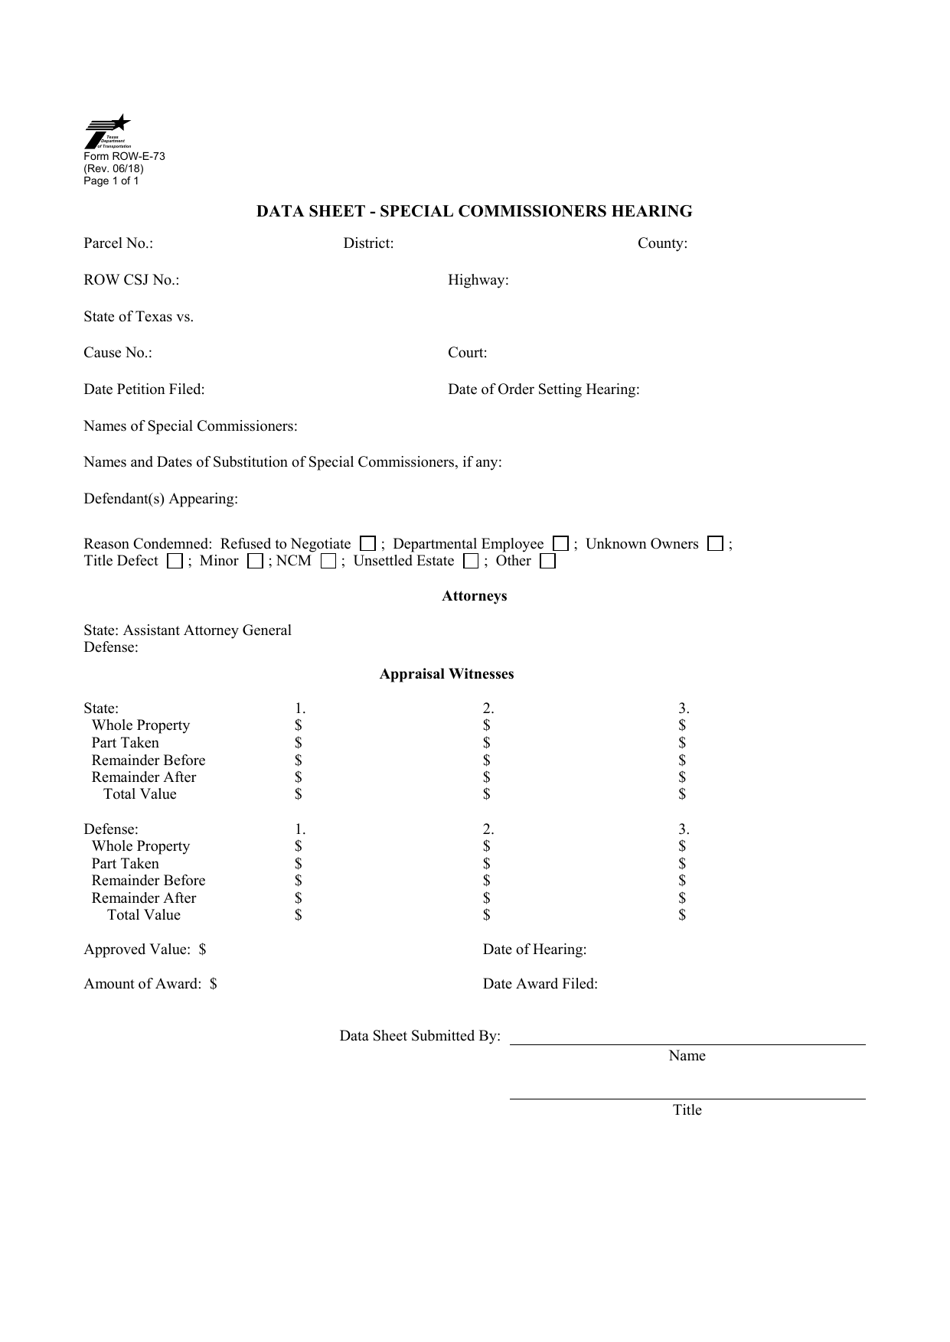 Form ROW-E-73 Data Sheet - Special Commissioners Hearing - Texas, Page 1